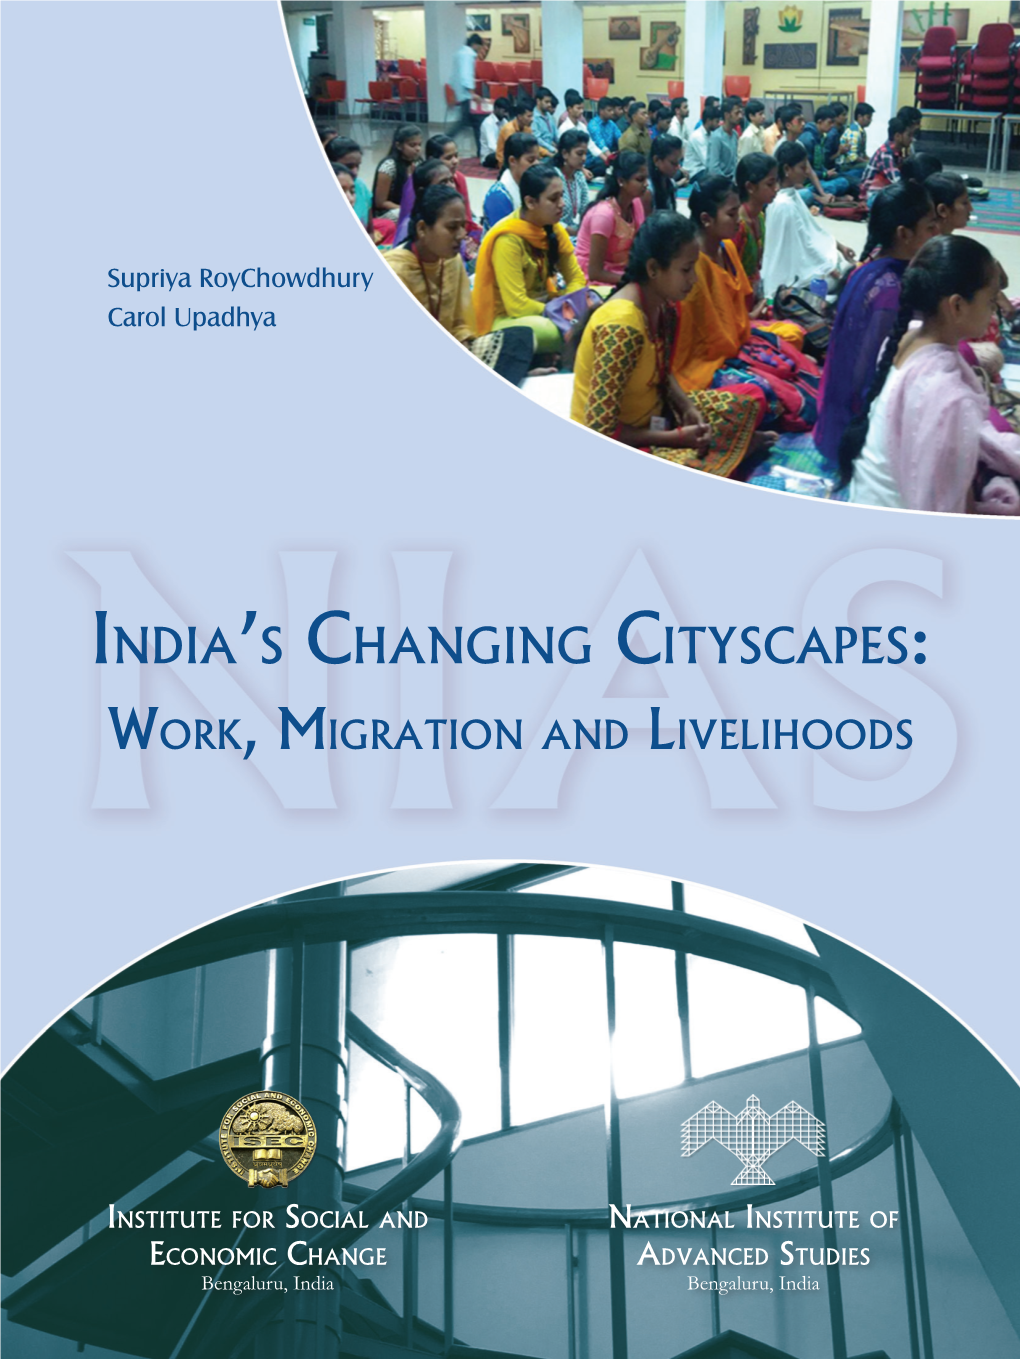 India's Changing Cityscapes: Work, Migration and Livelihoods